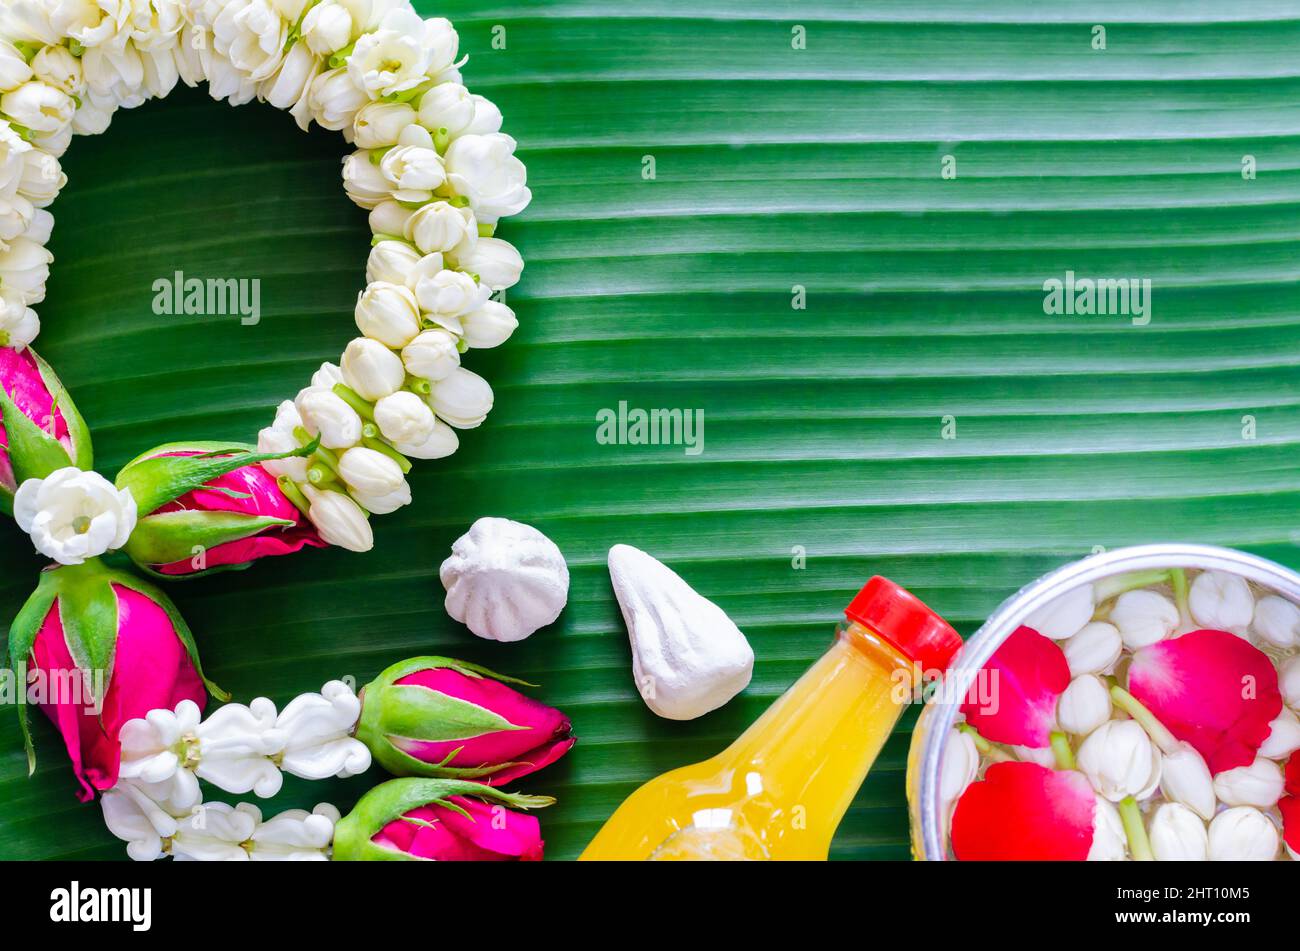 Songkran festival background with jasmine garland, scented water and marly limestone, flowers in water bowl for blessing on banana leaf background. Stock Photo